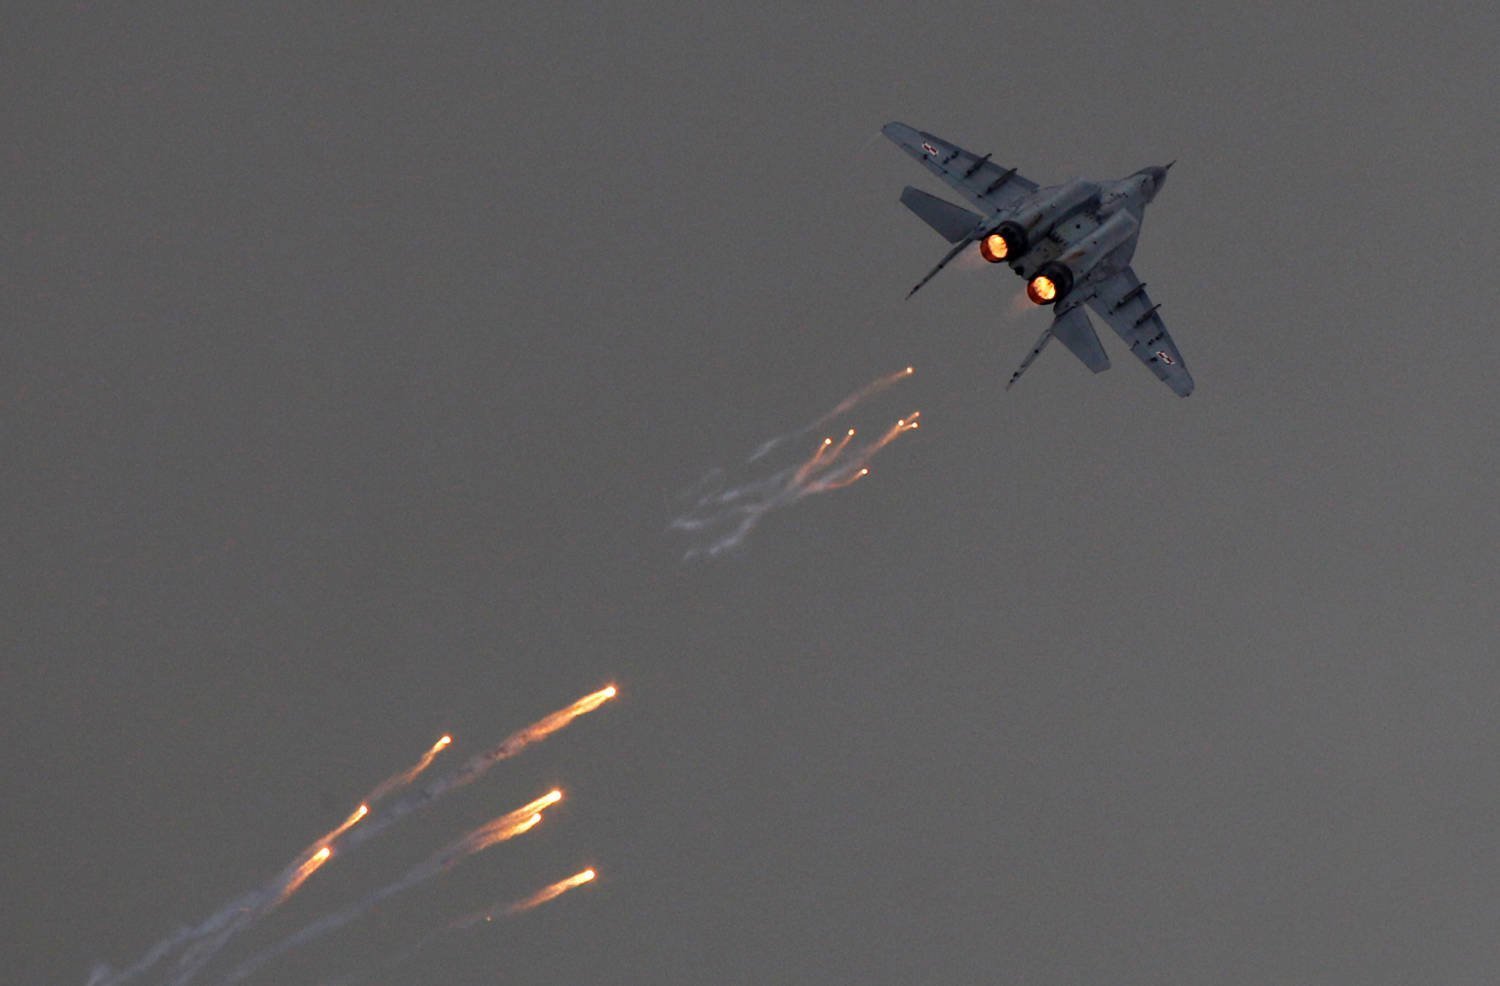 File Photo: A Polish Air Force Mig 29 Aircraft Fires Flares During A Performance At The Radom Air Show At An Airport In Radom